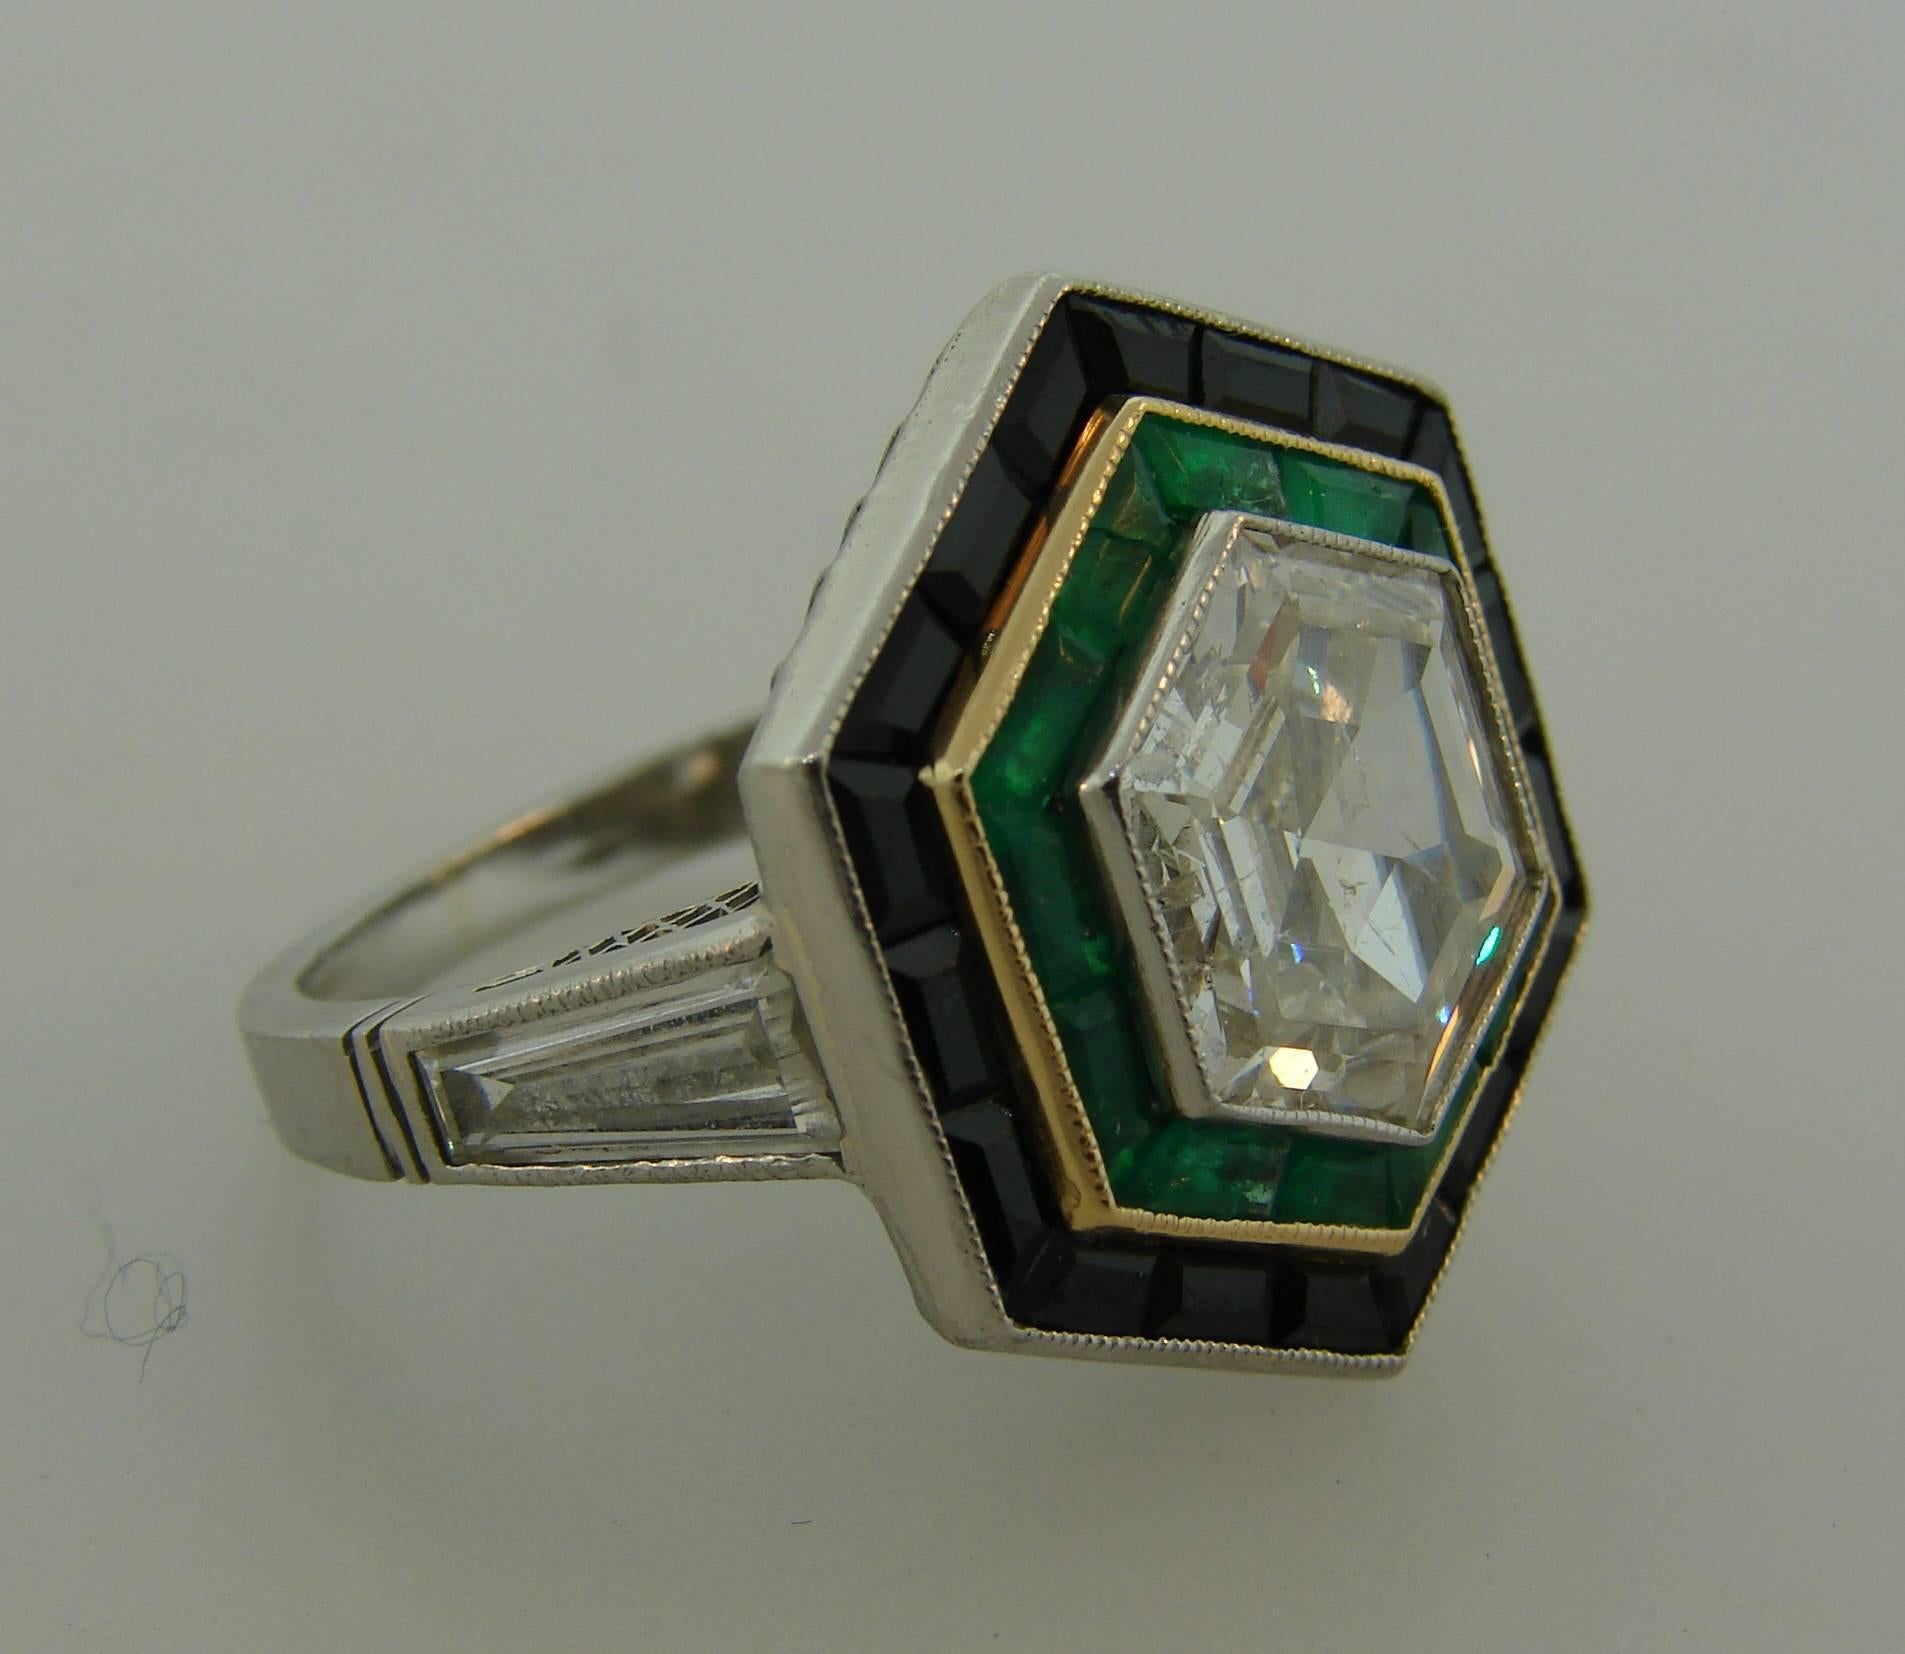 Gorgeous Art Deco Revival ring. An unusual cut diamond in hexagonal shape framed with a row of pre-cut emeralds and a row of pre-cut black onyx. The beautiful openwork setting is made of platinum  and accented with two tapered baguette cut diamonds.